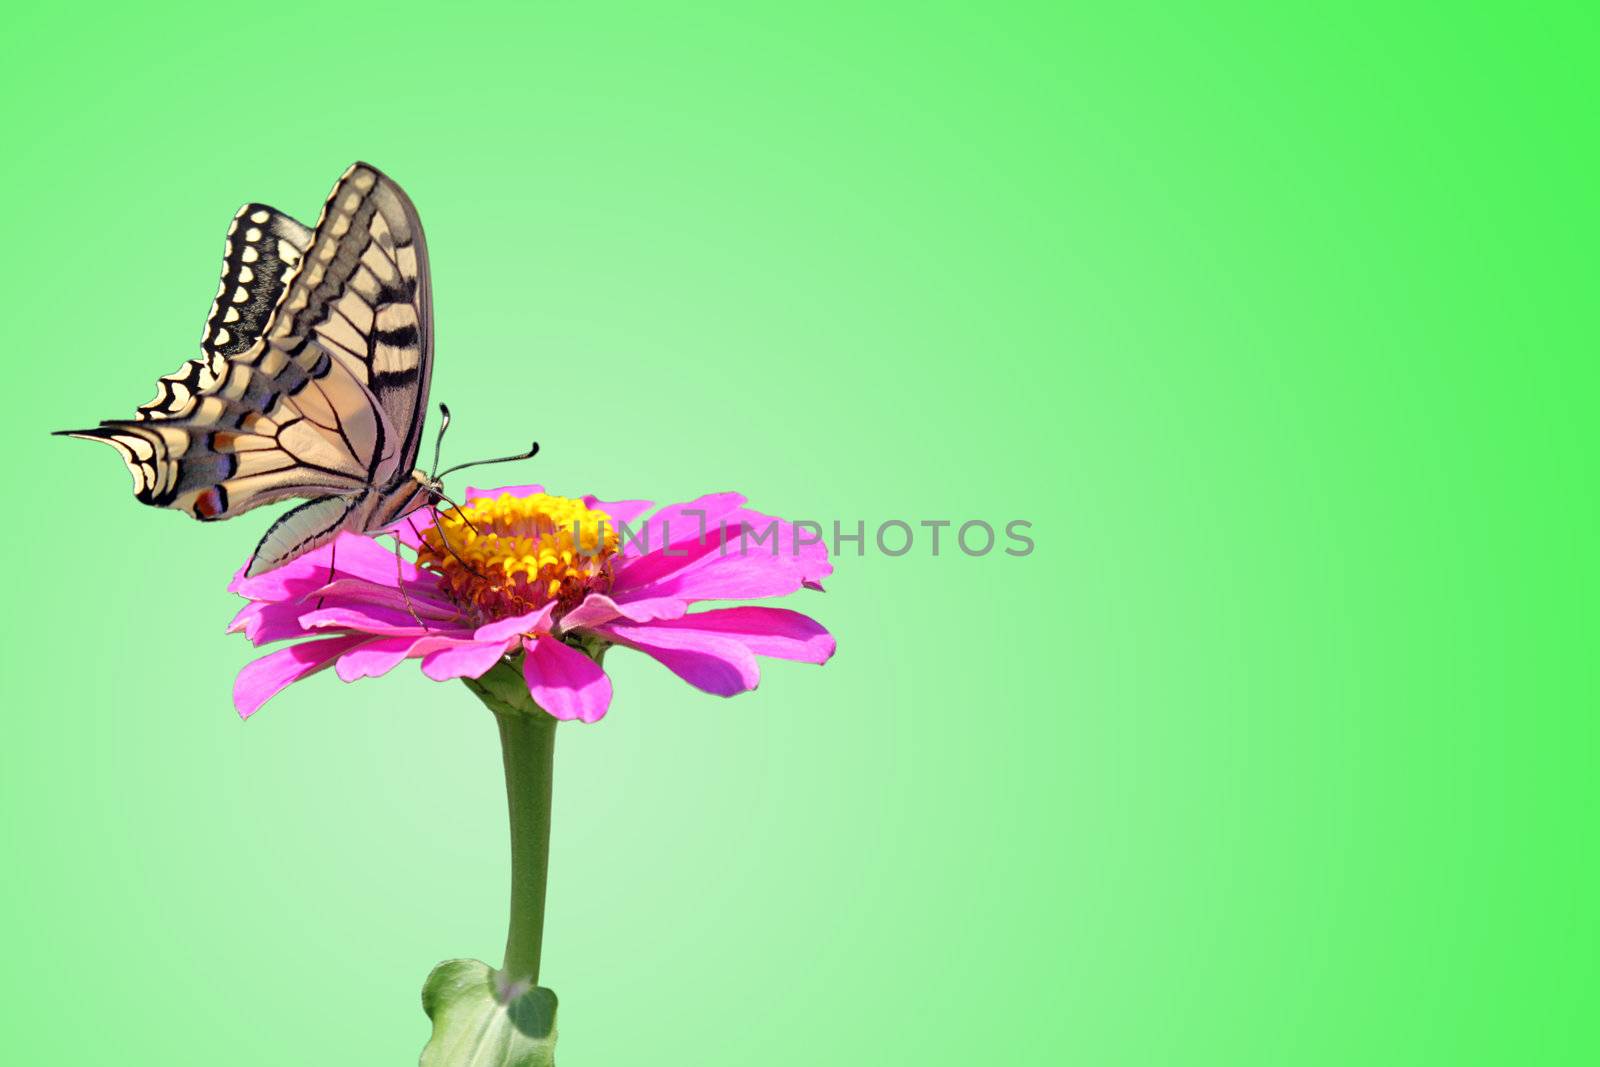 butterfly (Papilio Machaon) sitting on flower (zinnia) over clean green background